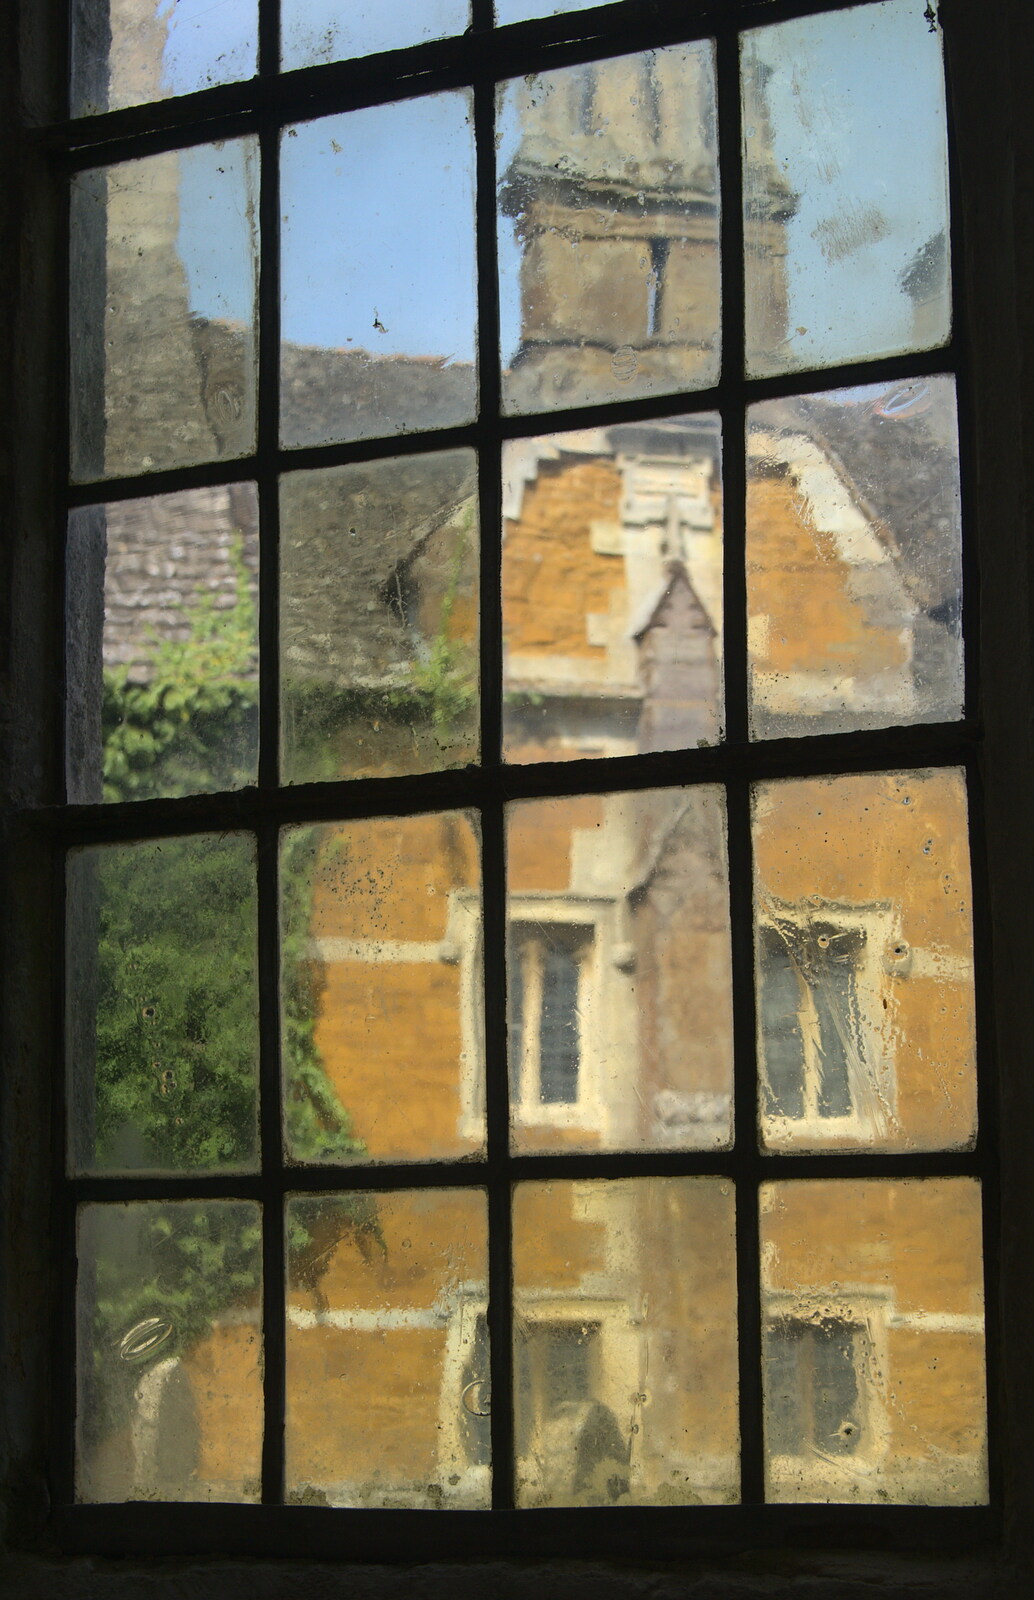 View of the Bede house through a window from The BSCC Weekend Away, Lyddington, Rutland - 9th May 2015